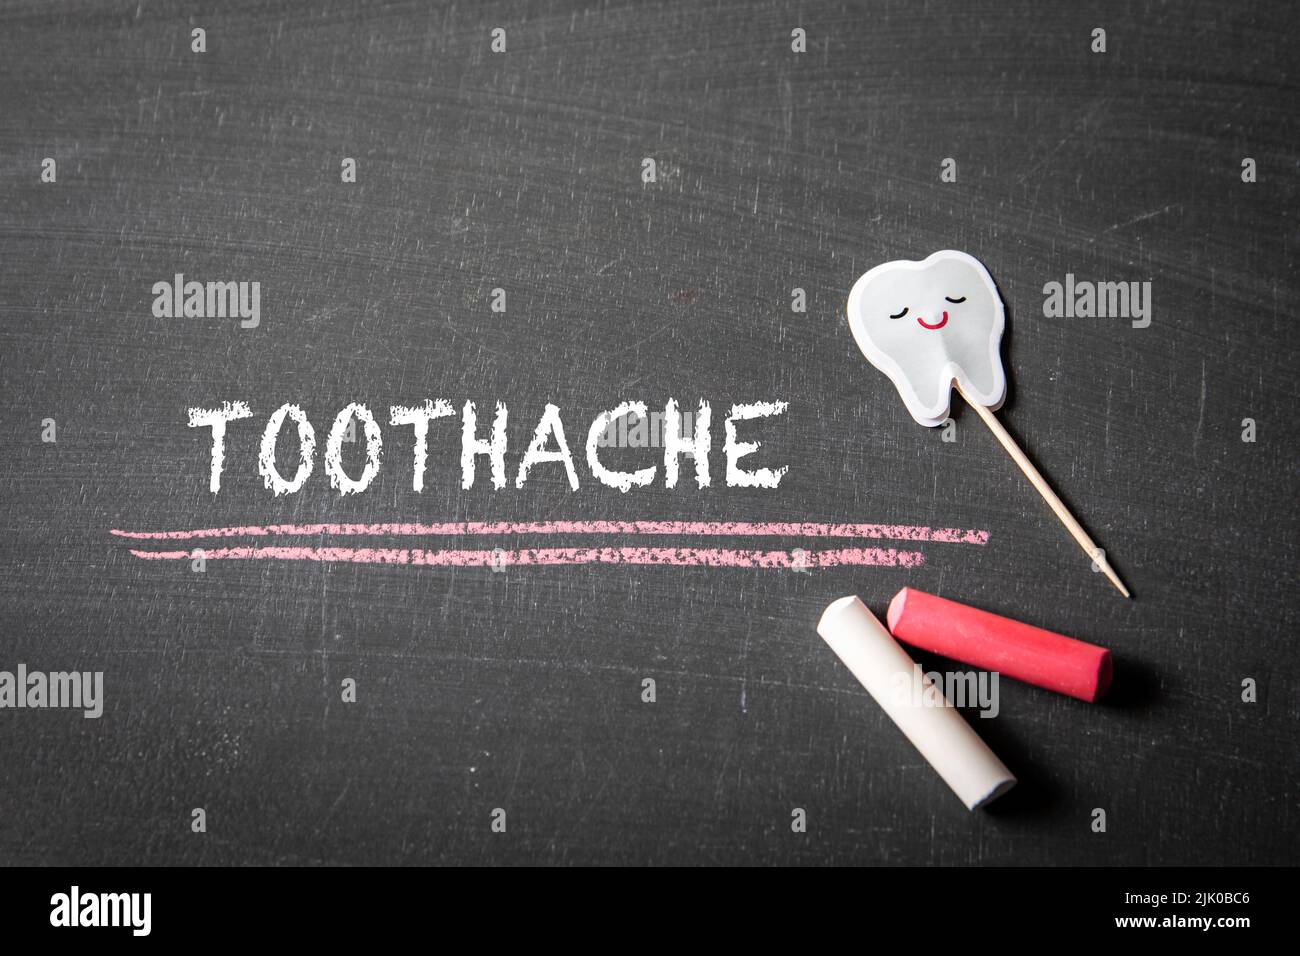 Toothache. Text and pieces of chalk on a black chalkboard. Stock Photo